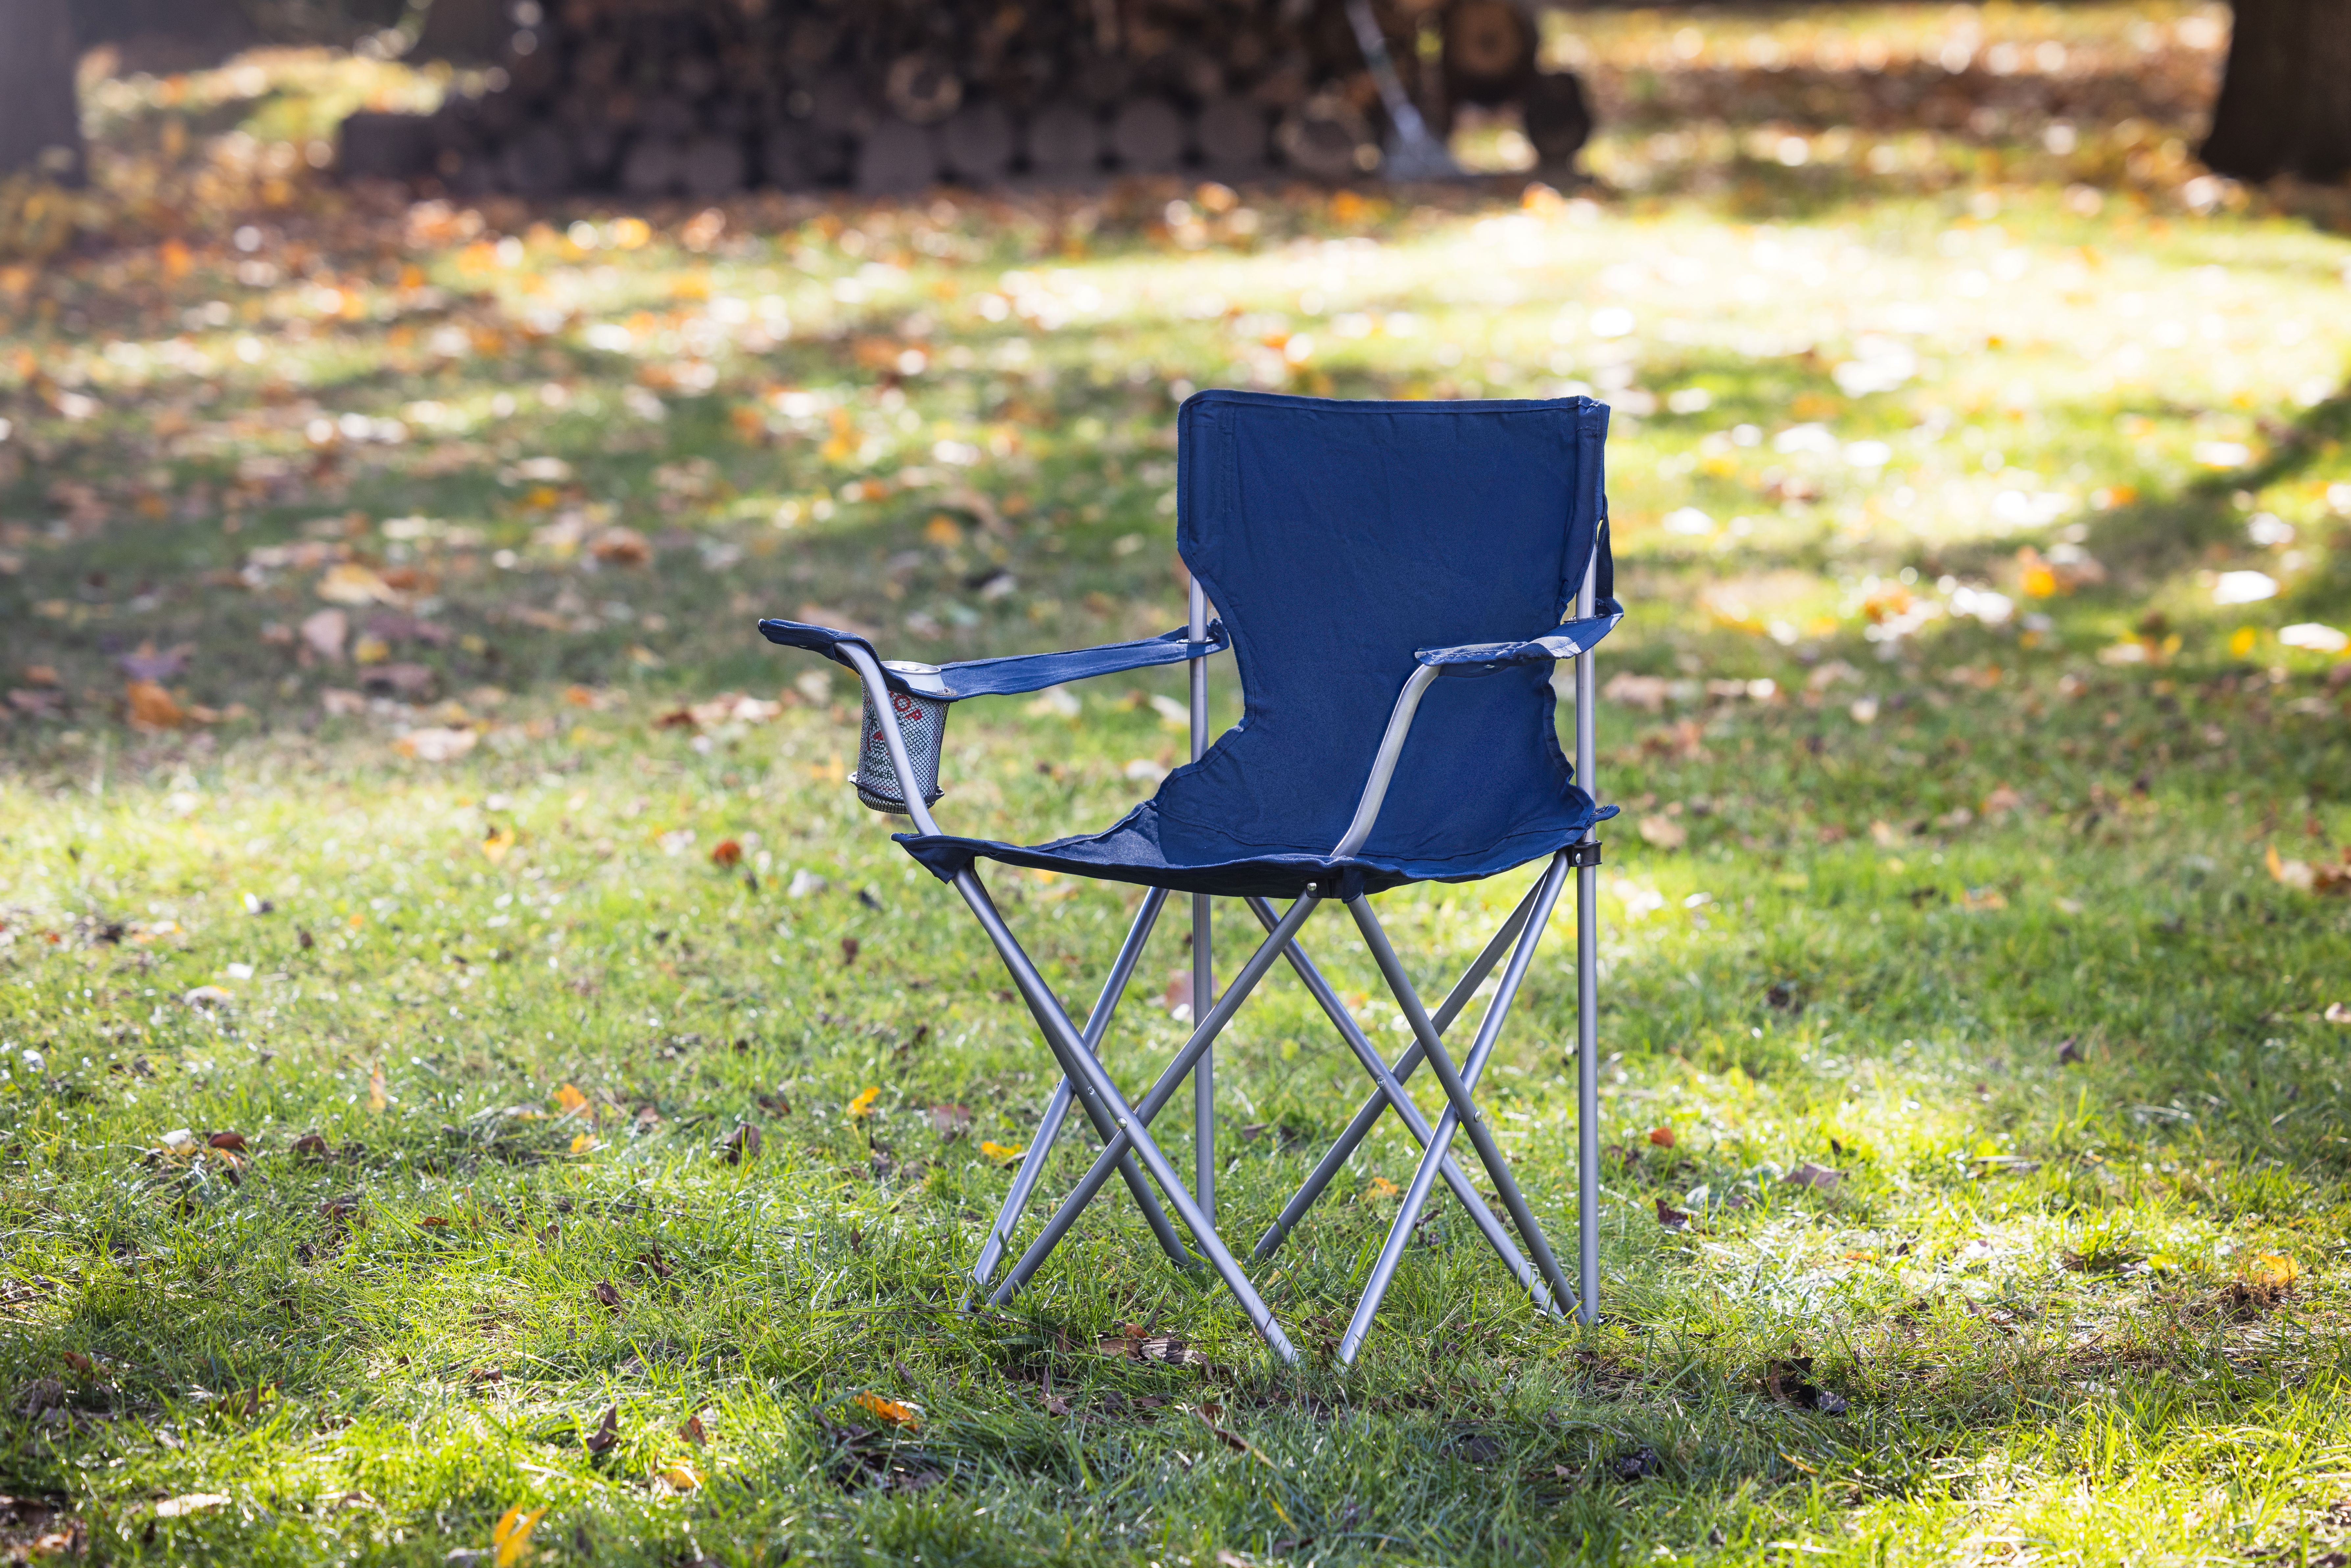 Ozark Trail Basic Quad Folding Camp Chair With Cup Holder, Blue, Adult - image 12 of 14